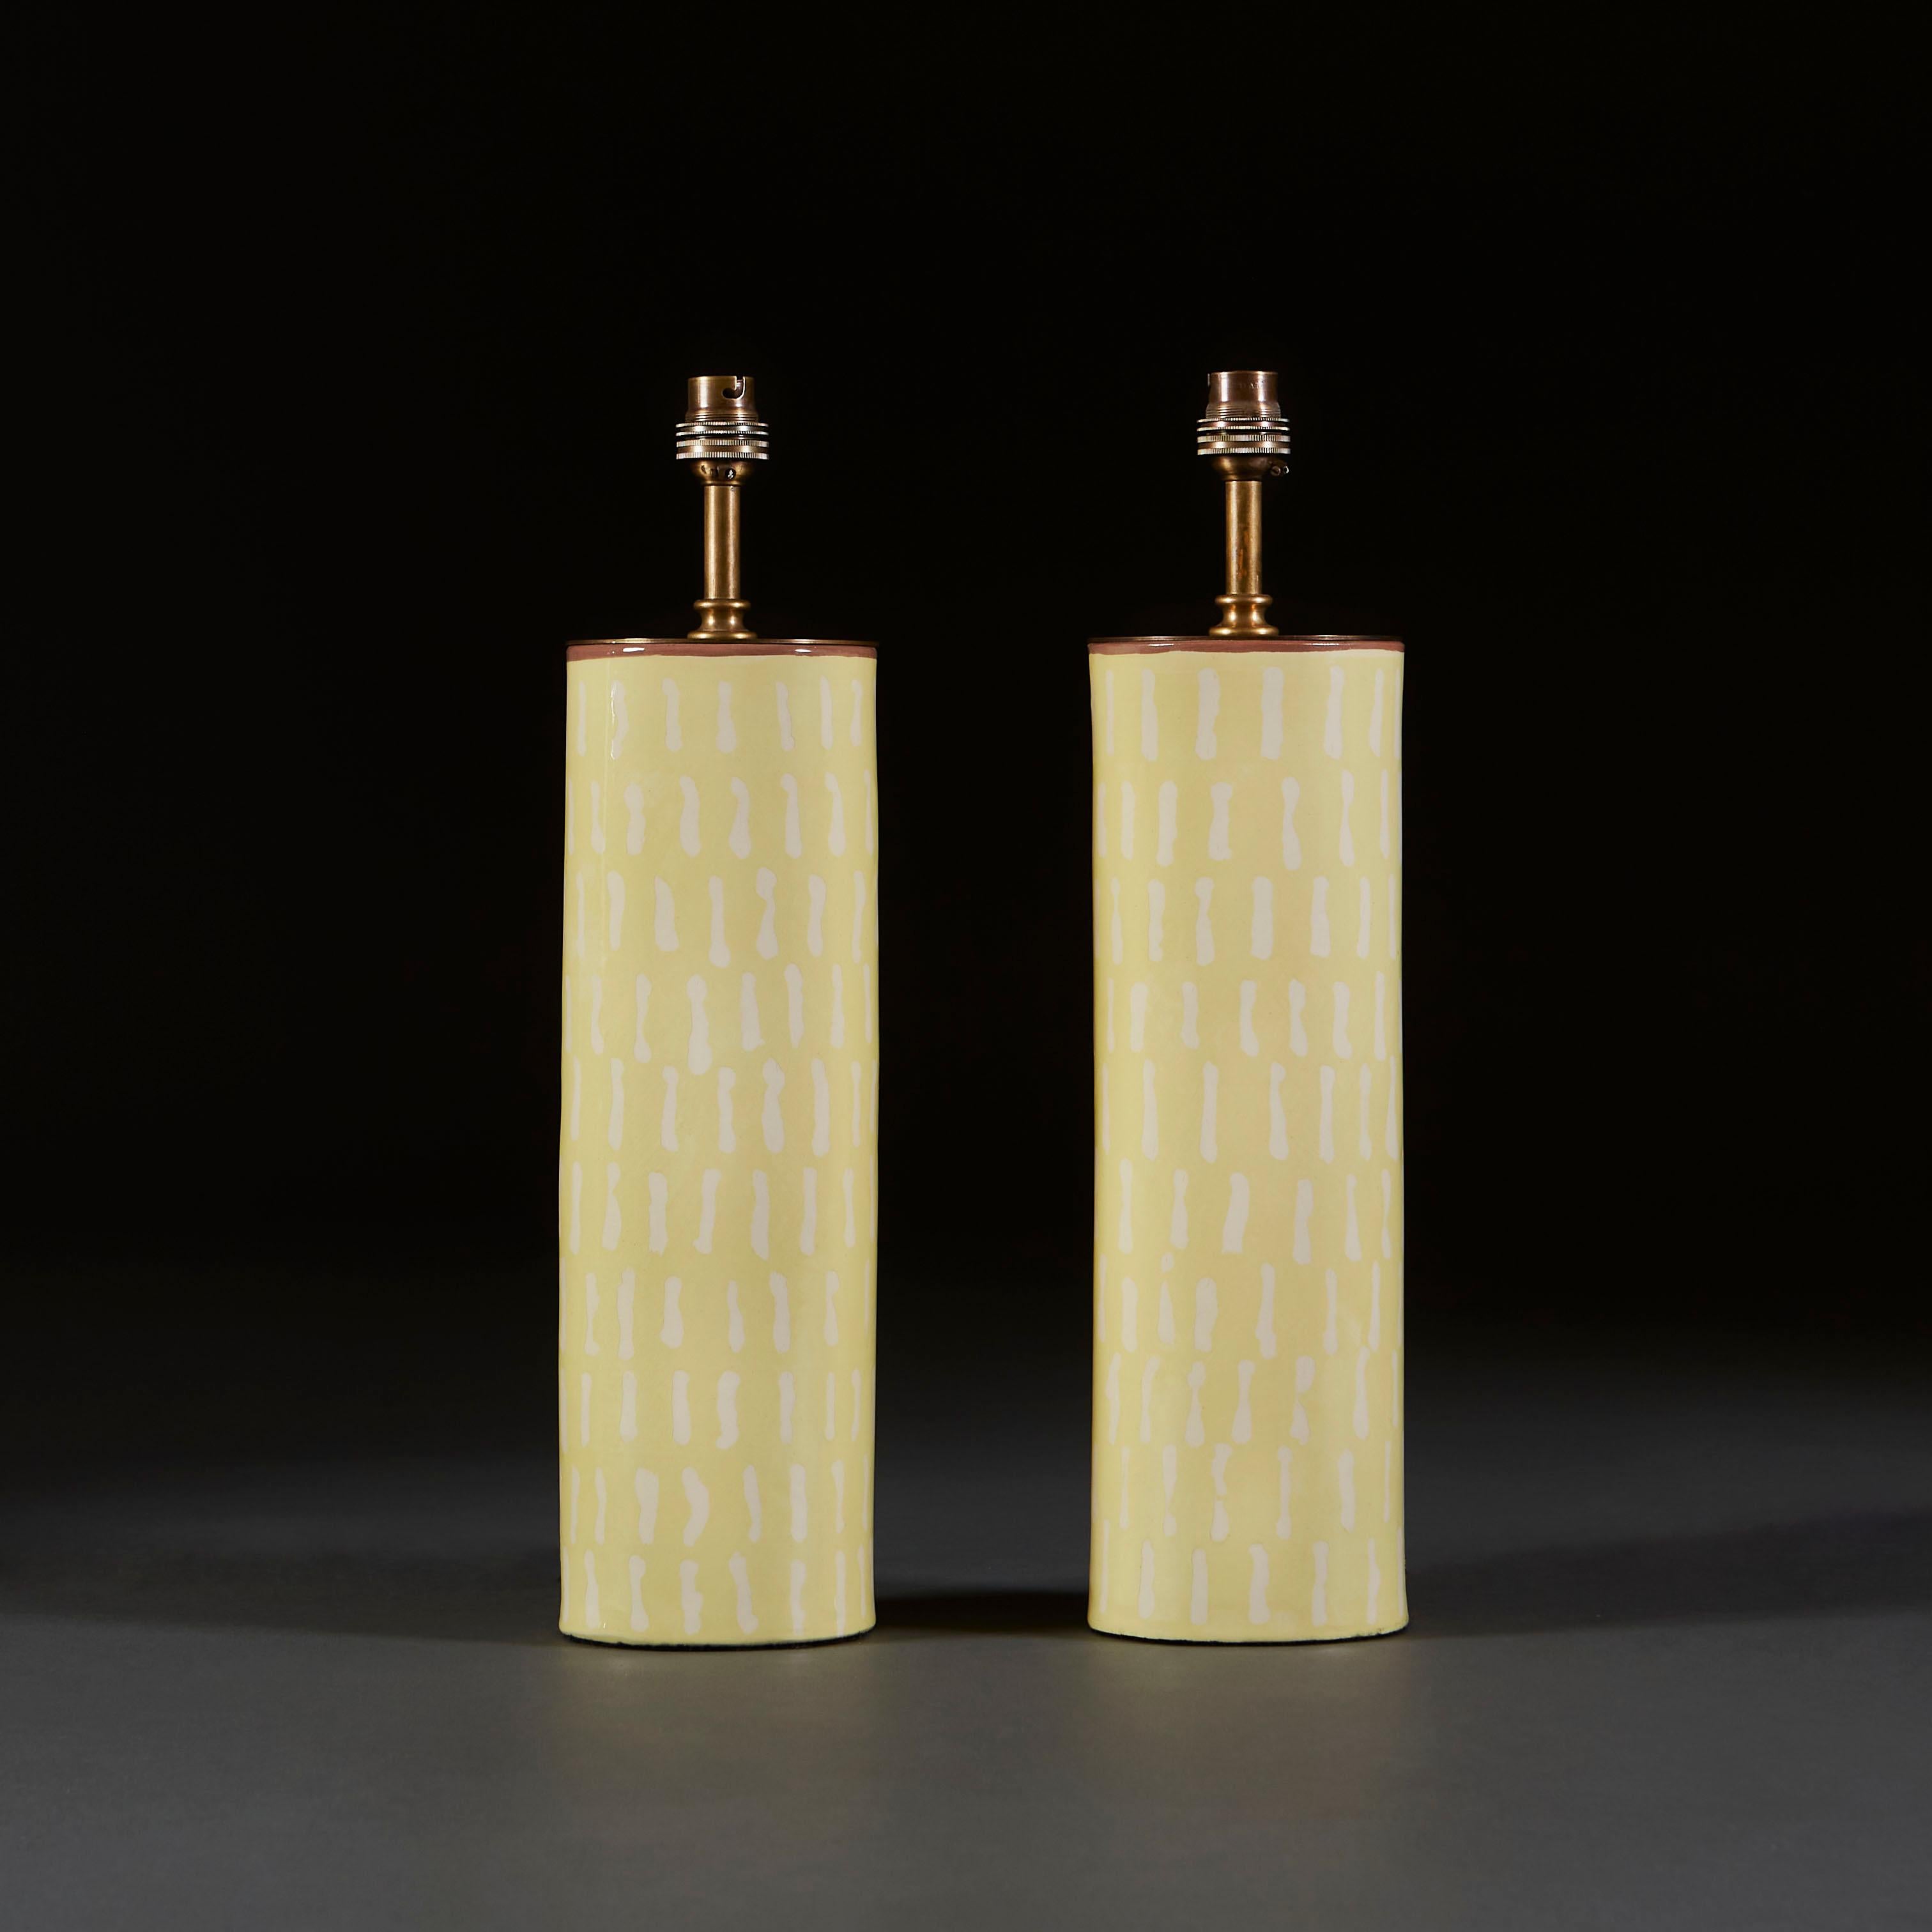 A pair of studio pottery vases made using white earthenware, now converted as table lamps, the yellow ground decorated throughout with white dashes, with contrasting brown rims to the tops. Hand made in the UK. 

Currently wired for the